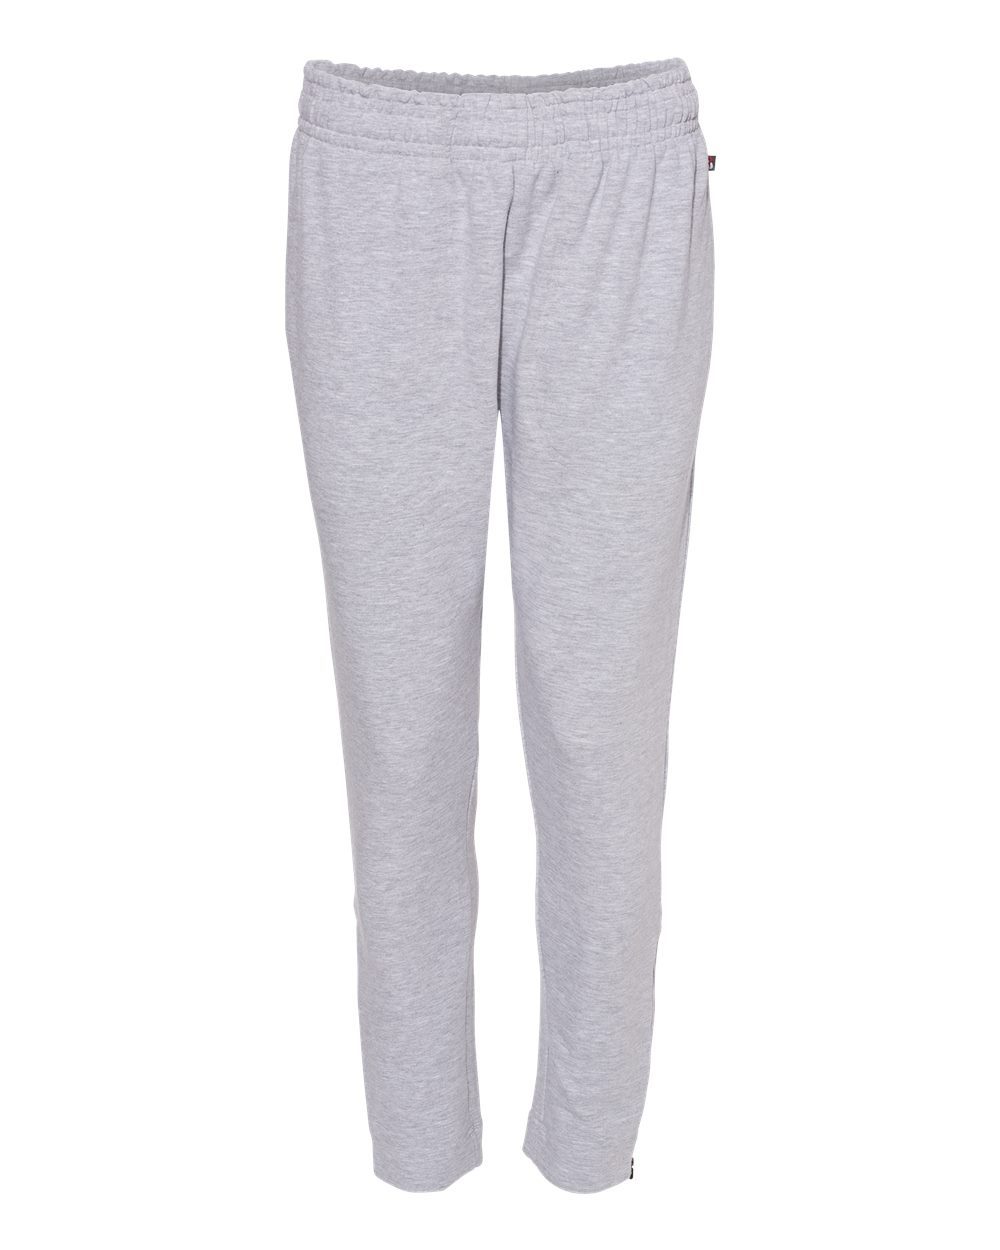 Women's Classic French Terry Jogger Lounge Pants (Sizes, S-3XL)